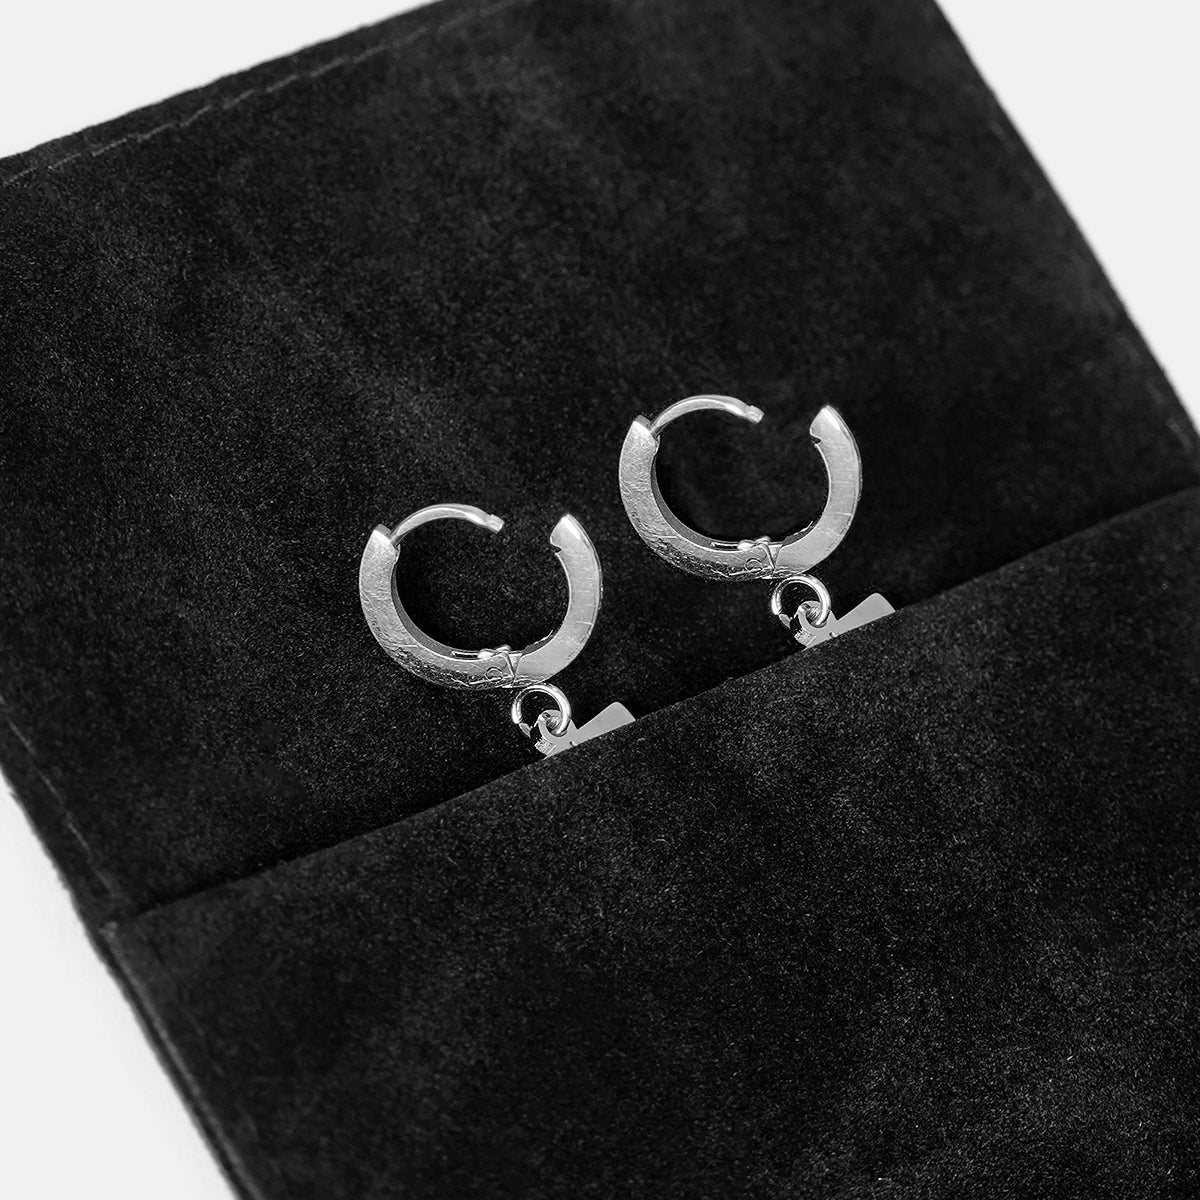 70 Number Earring - Stainless Steel